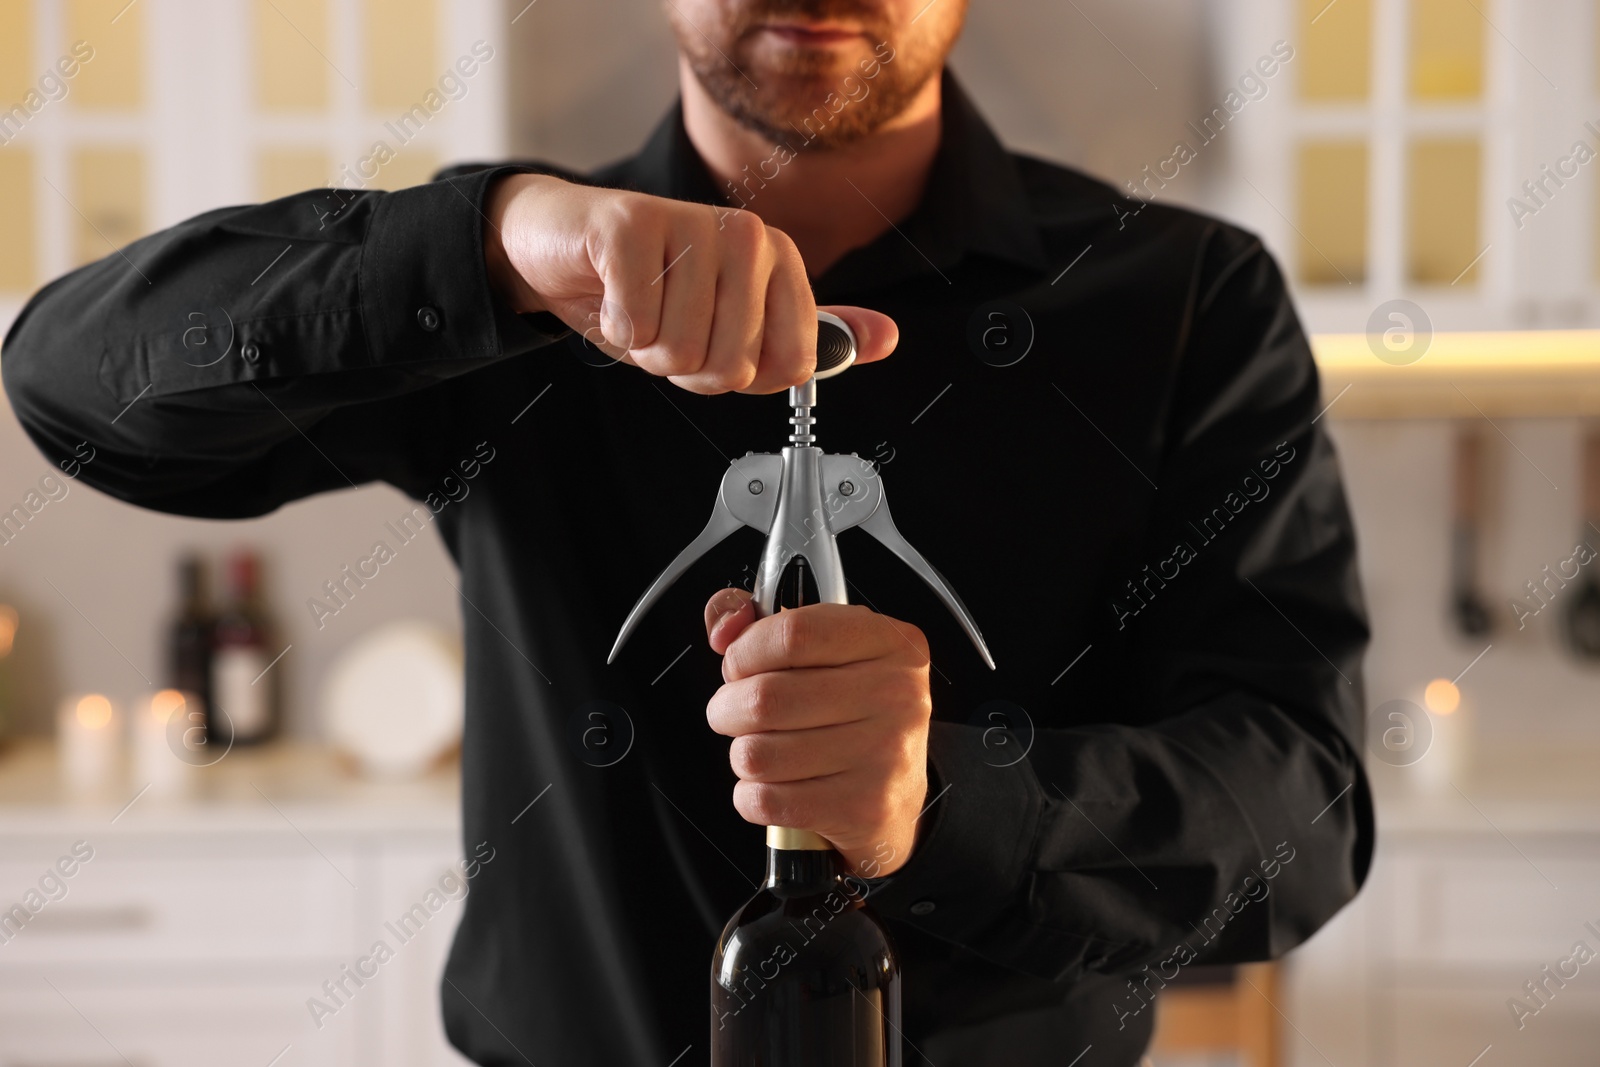 Photo of Man opening wine bottle with corkscrew in kitchen, closeup